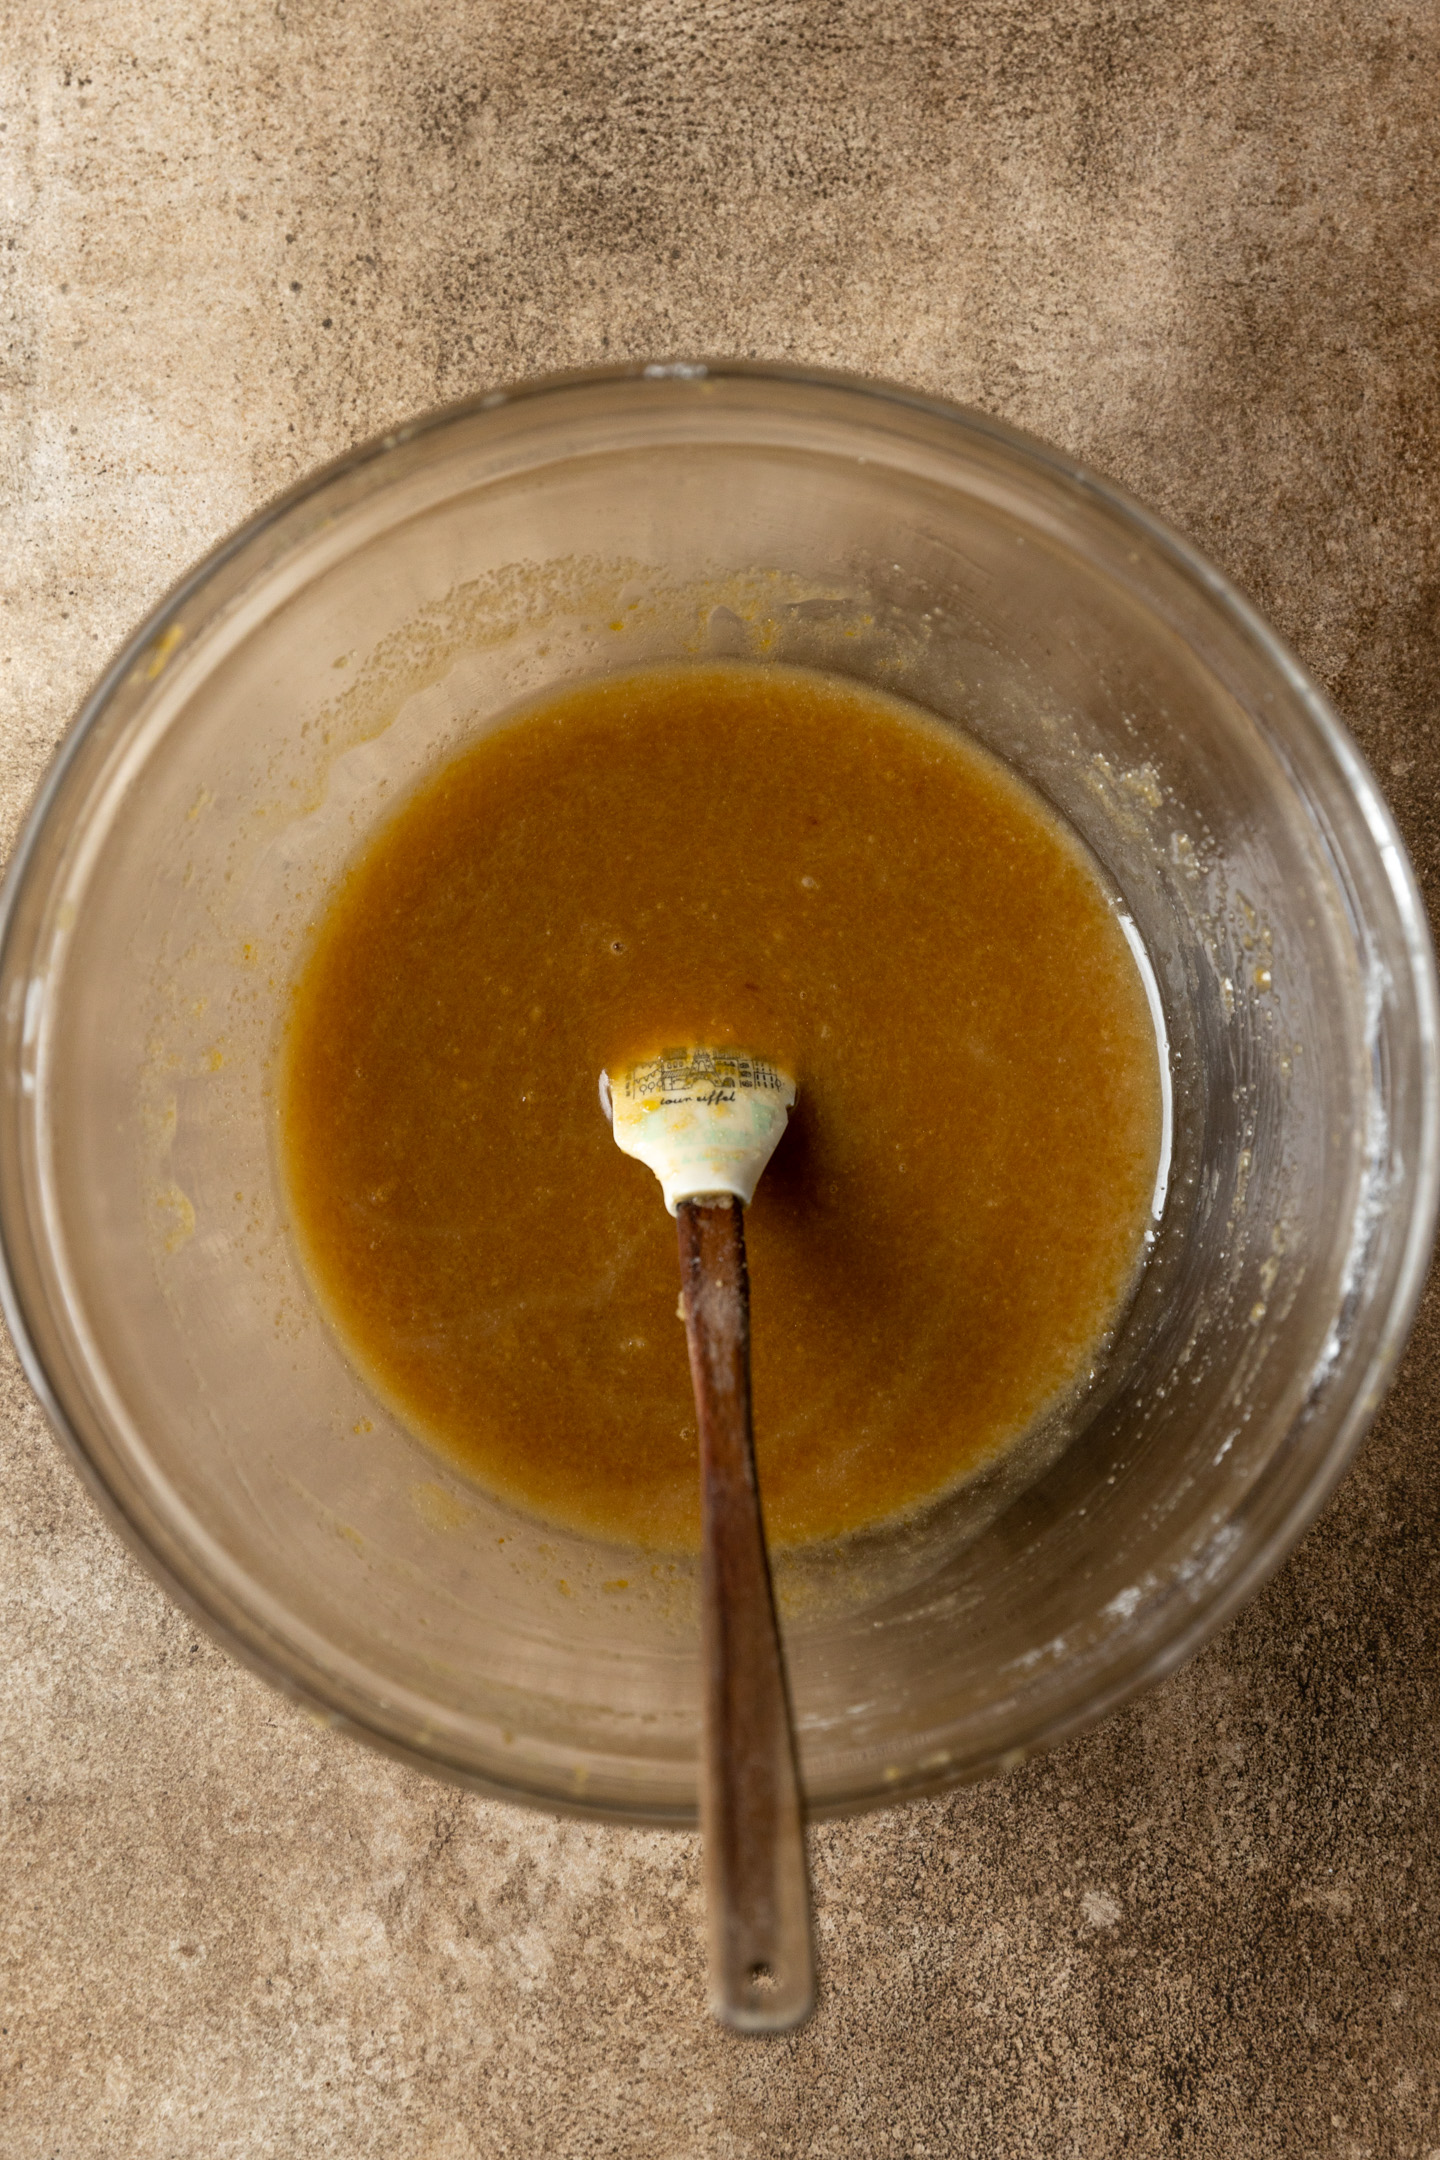 Melted butter, brown sugar, and white sugar stirred in a glass mixing bowl.